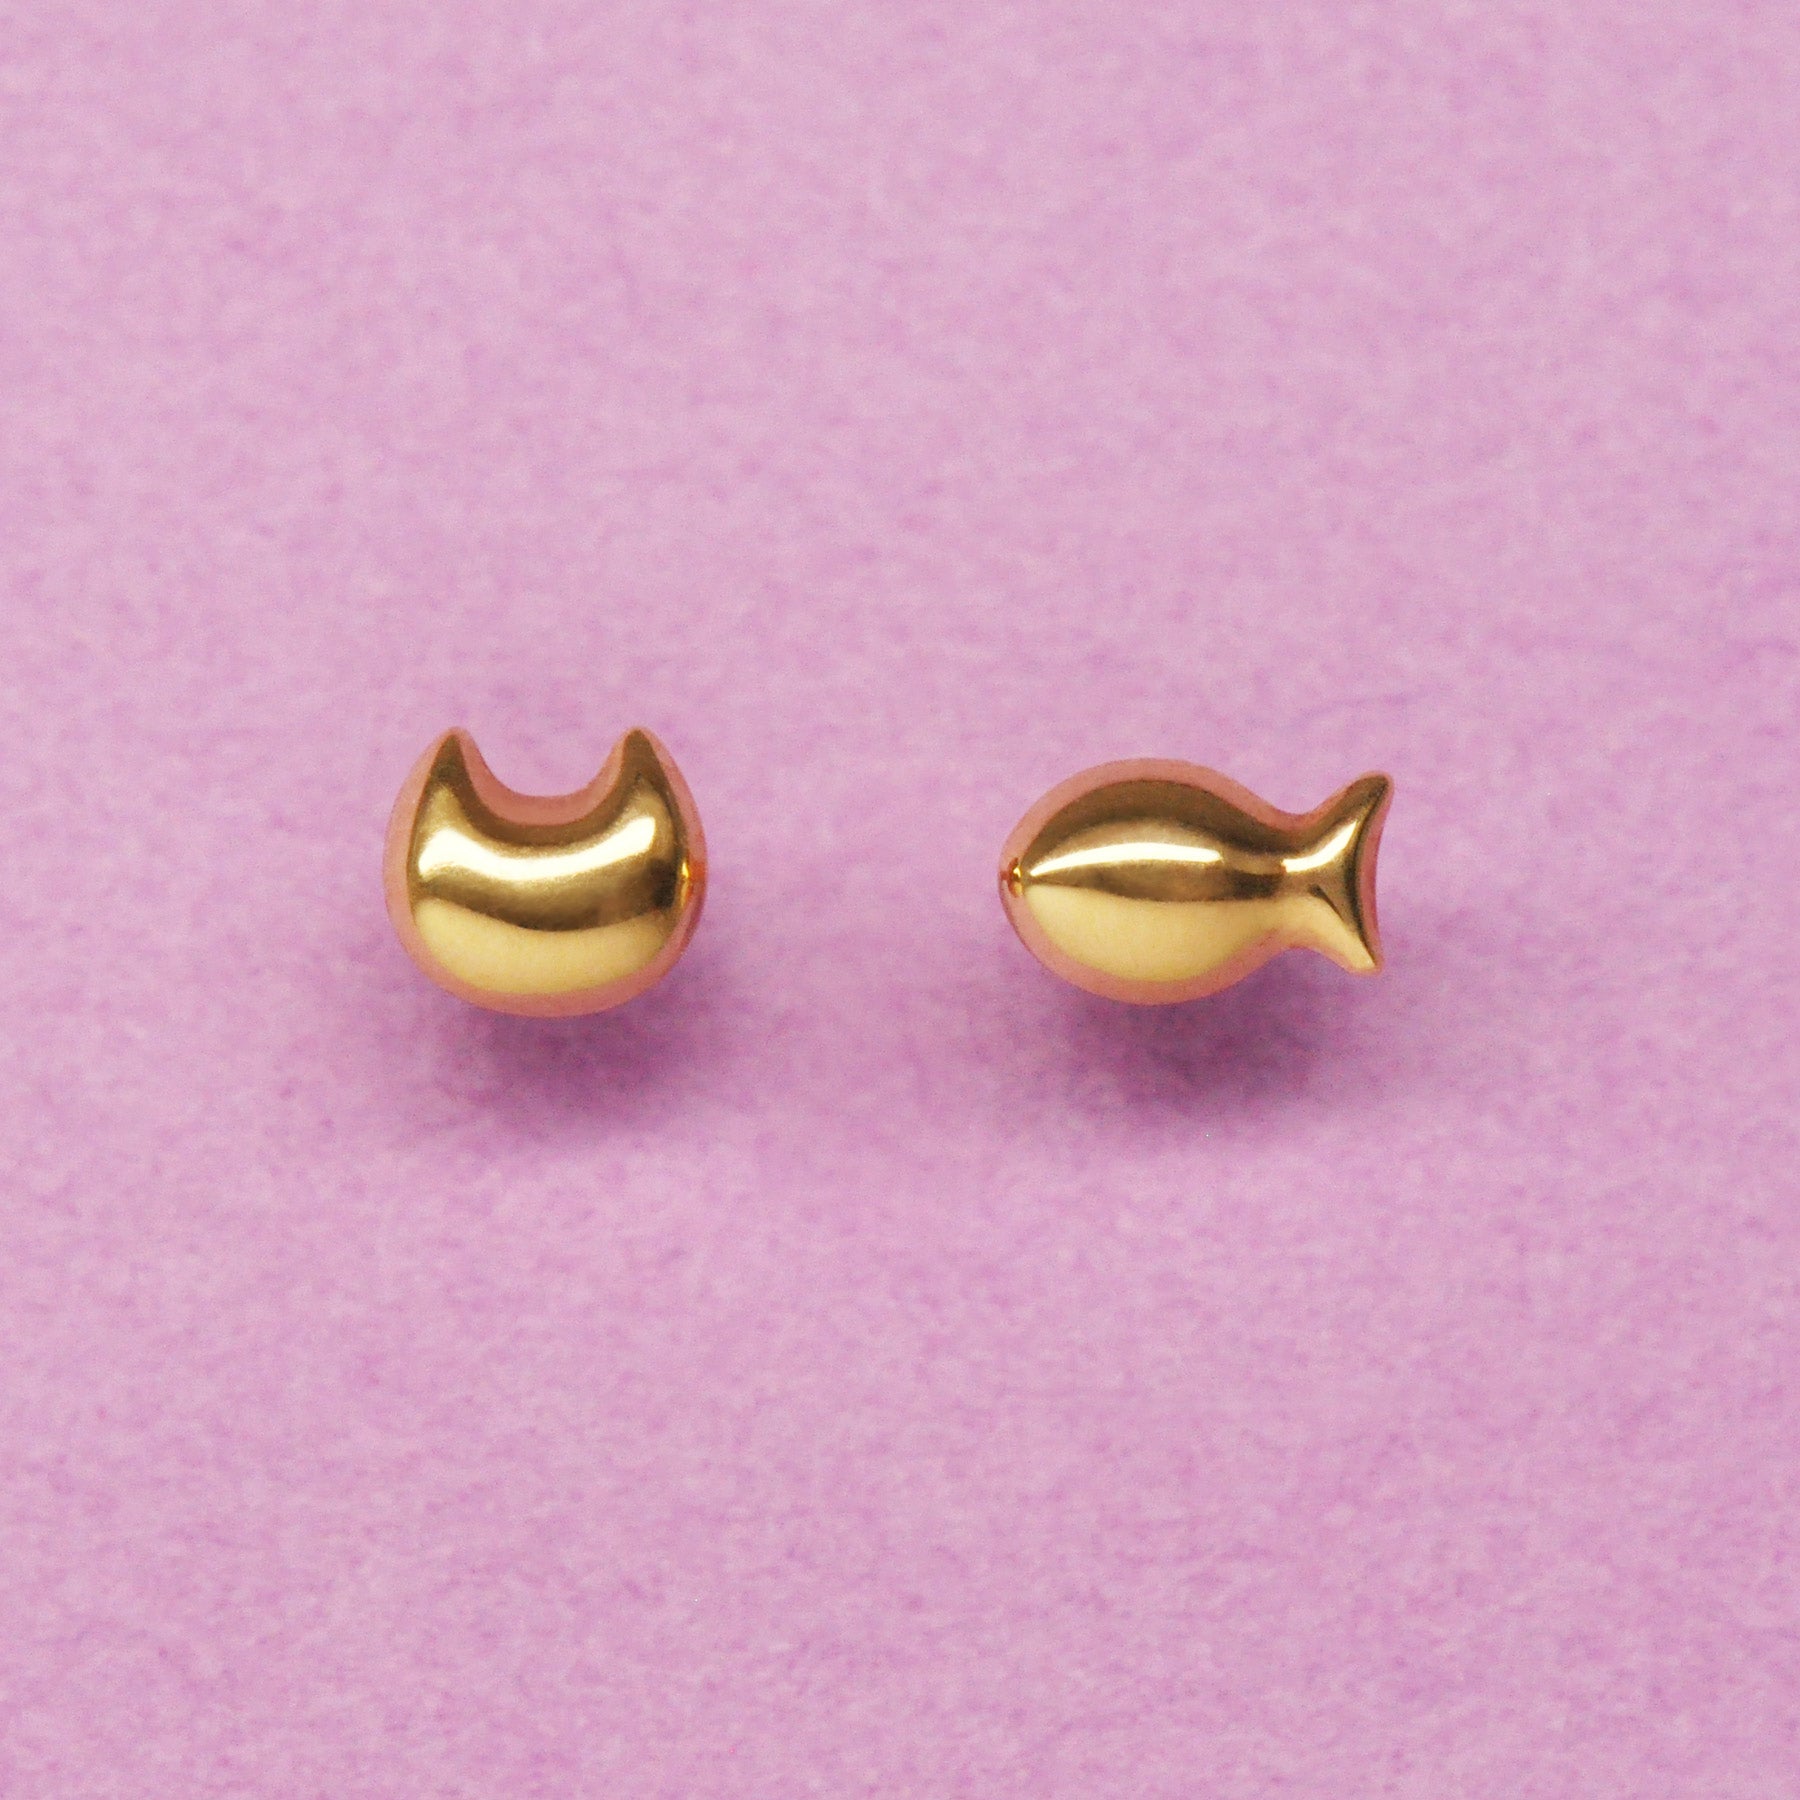 [Second Earrings] 18K Yellow Gold Yellow Cat & Fish Earrings - Product Image